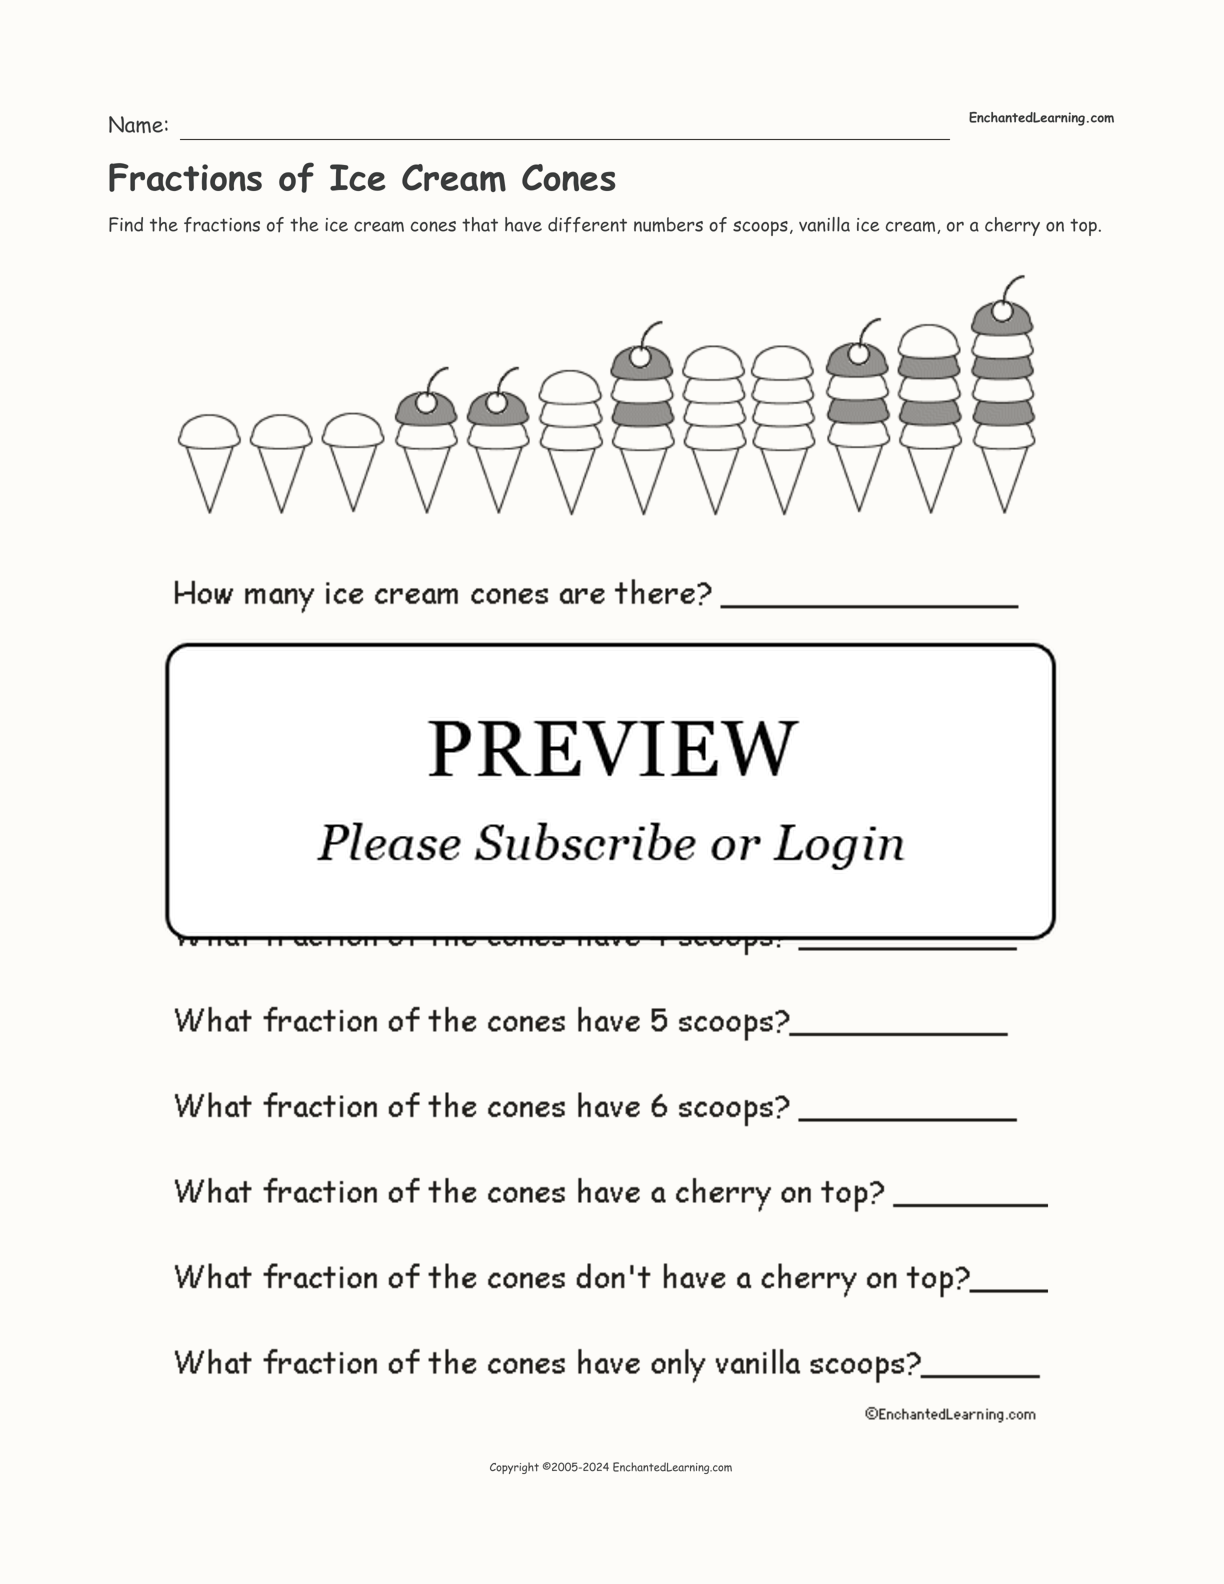 Fractions of Ice Cream Cones interactive worksheet page 1